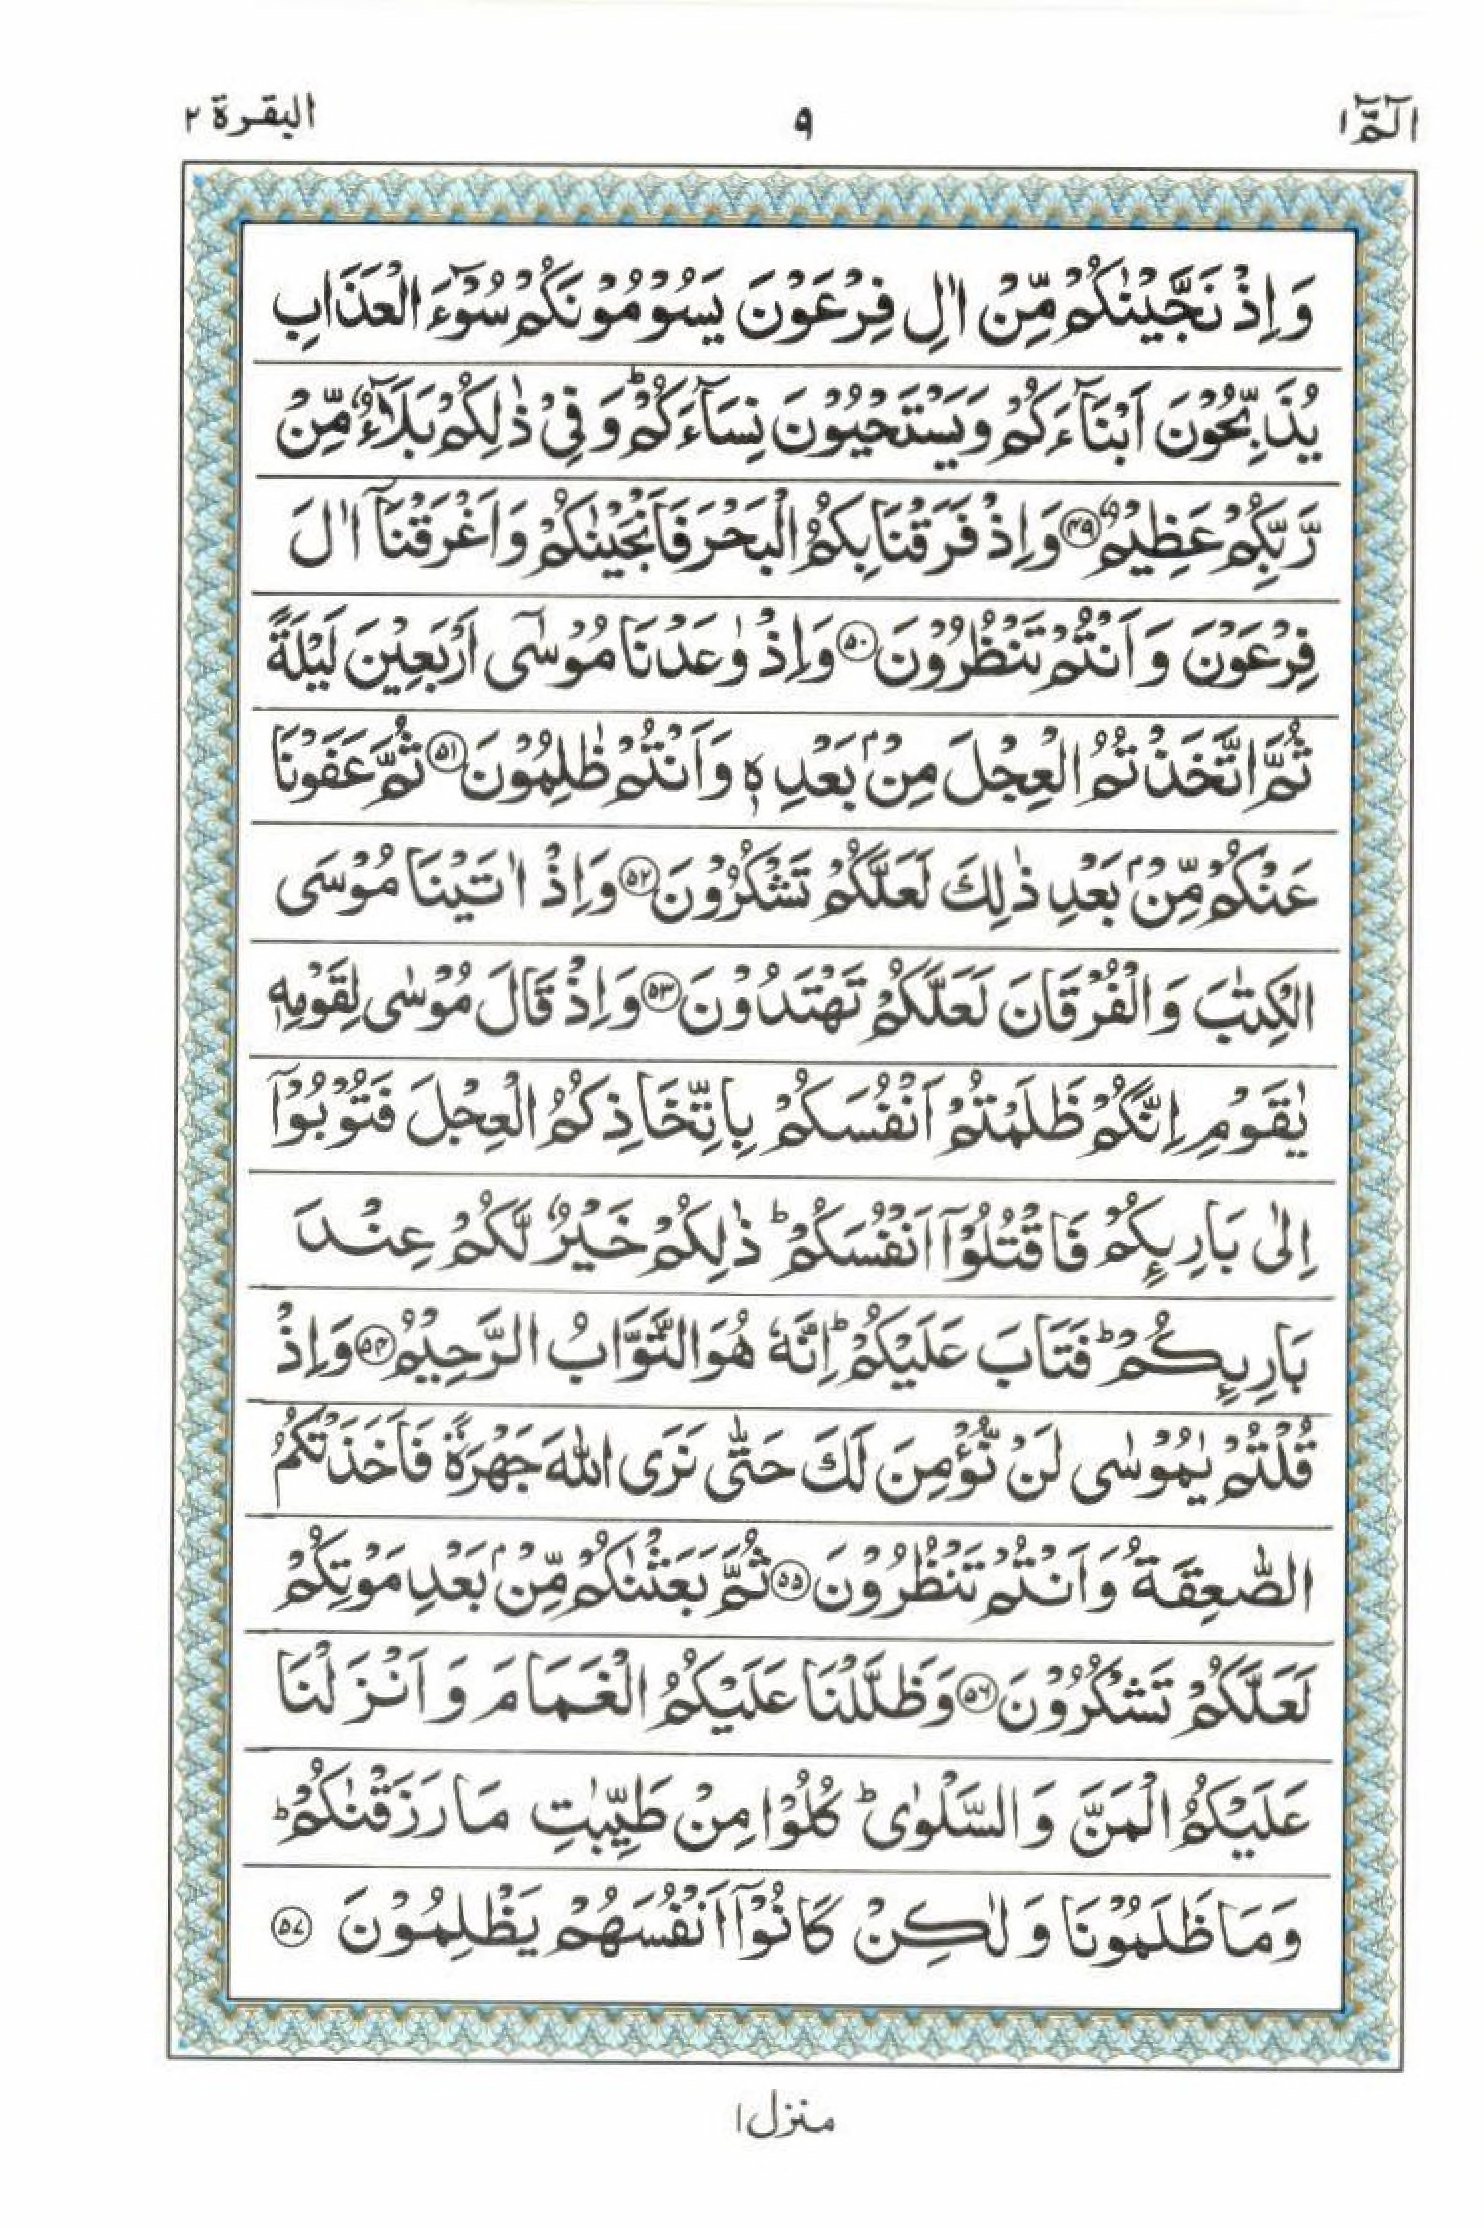 Read 15 Lines Quran, Part / Chapter / Siparah 1 Page 9